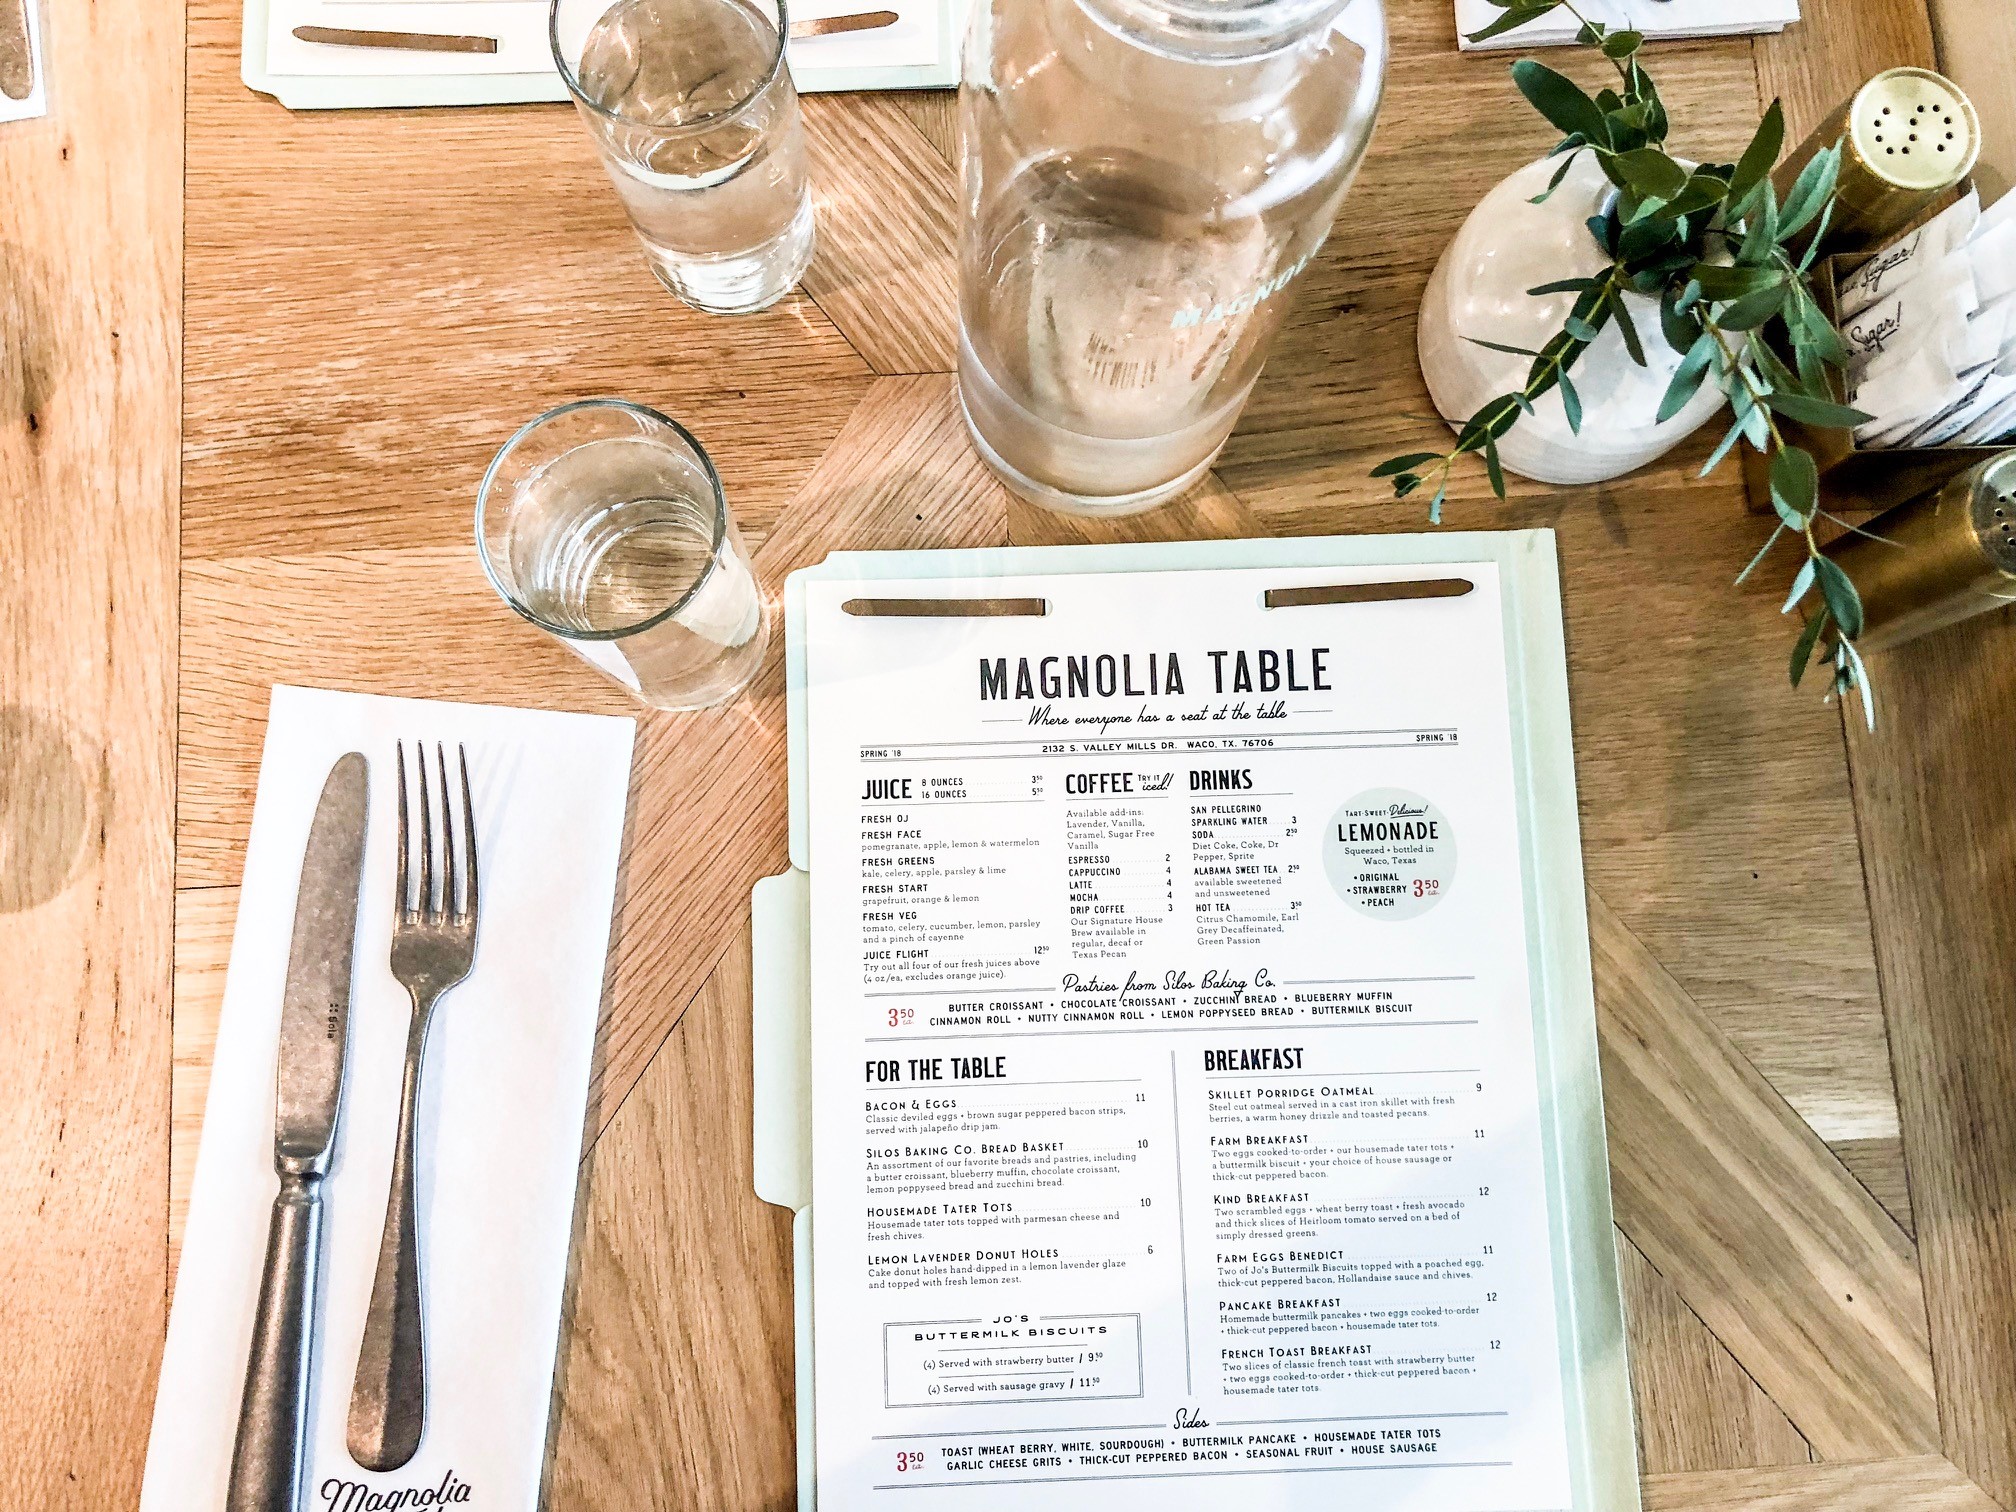 FIRST LOOK: Grand opening of Fixer Upper's restaurant, Magnolia Table